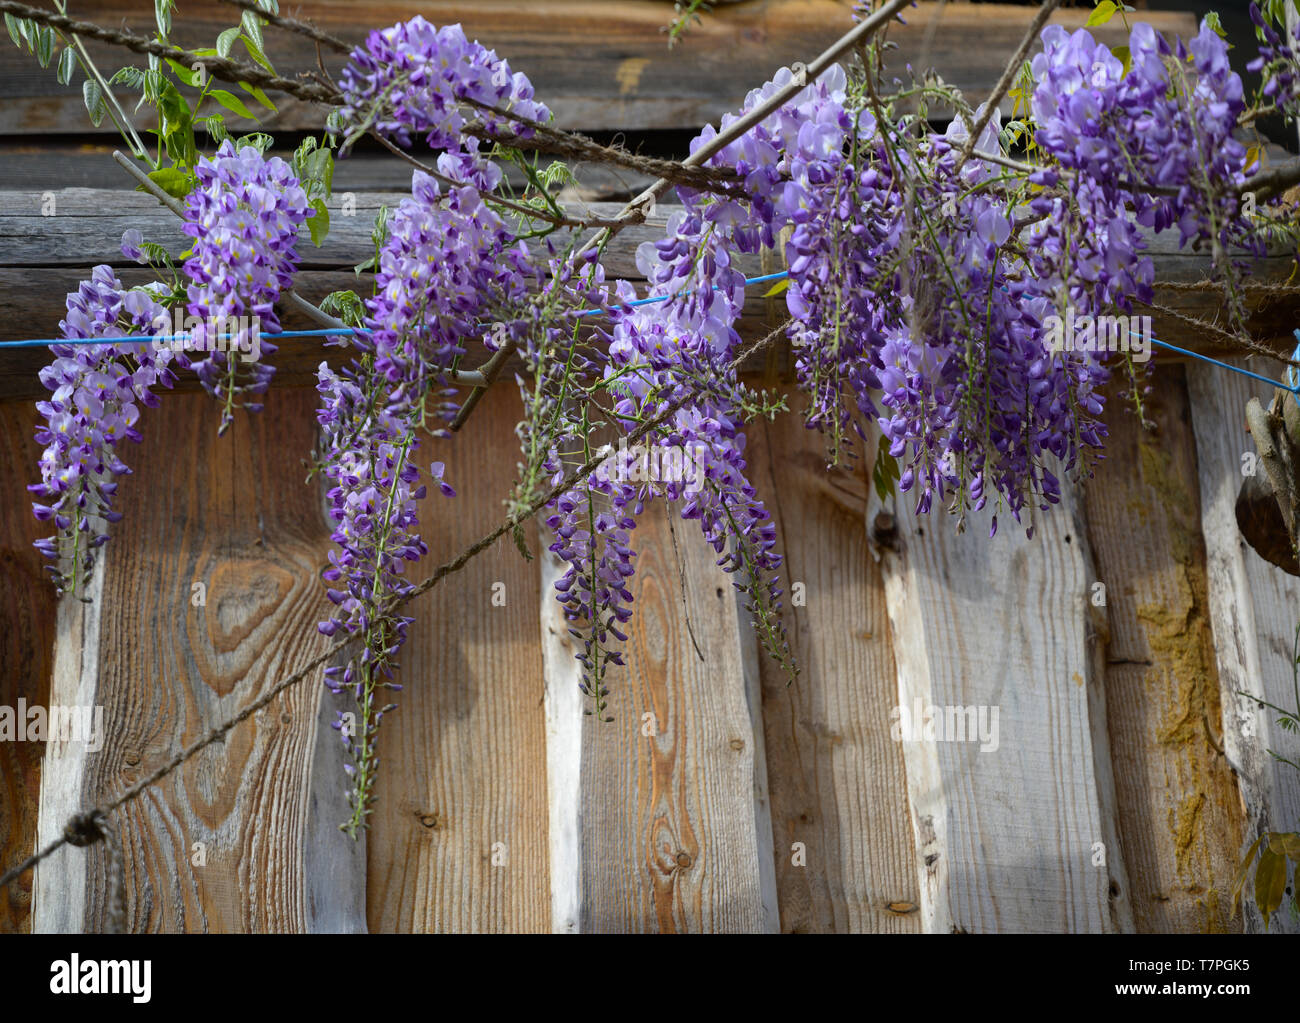 hanging flowers of wisteria, a climbing plant of the legume family on a wooden facade, copy space, selected focus Stock Photo